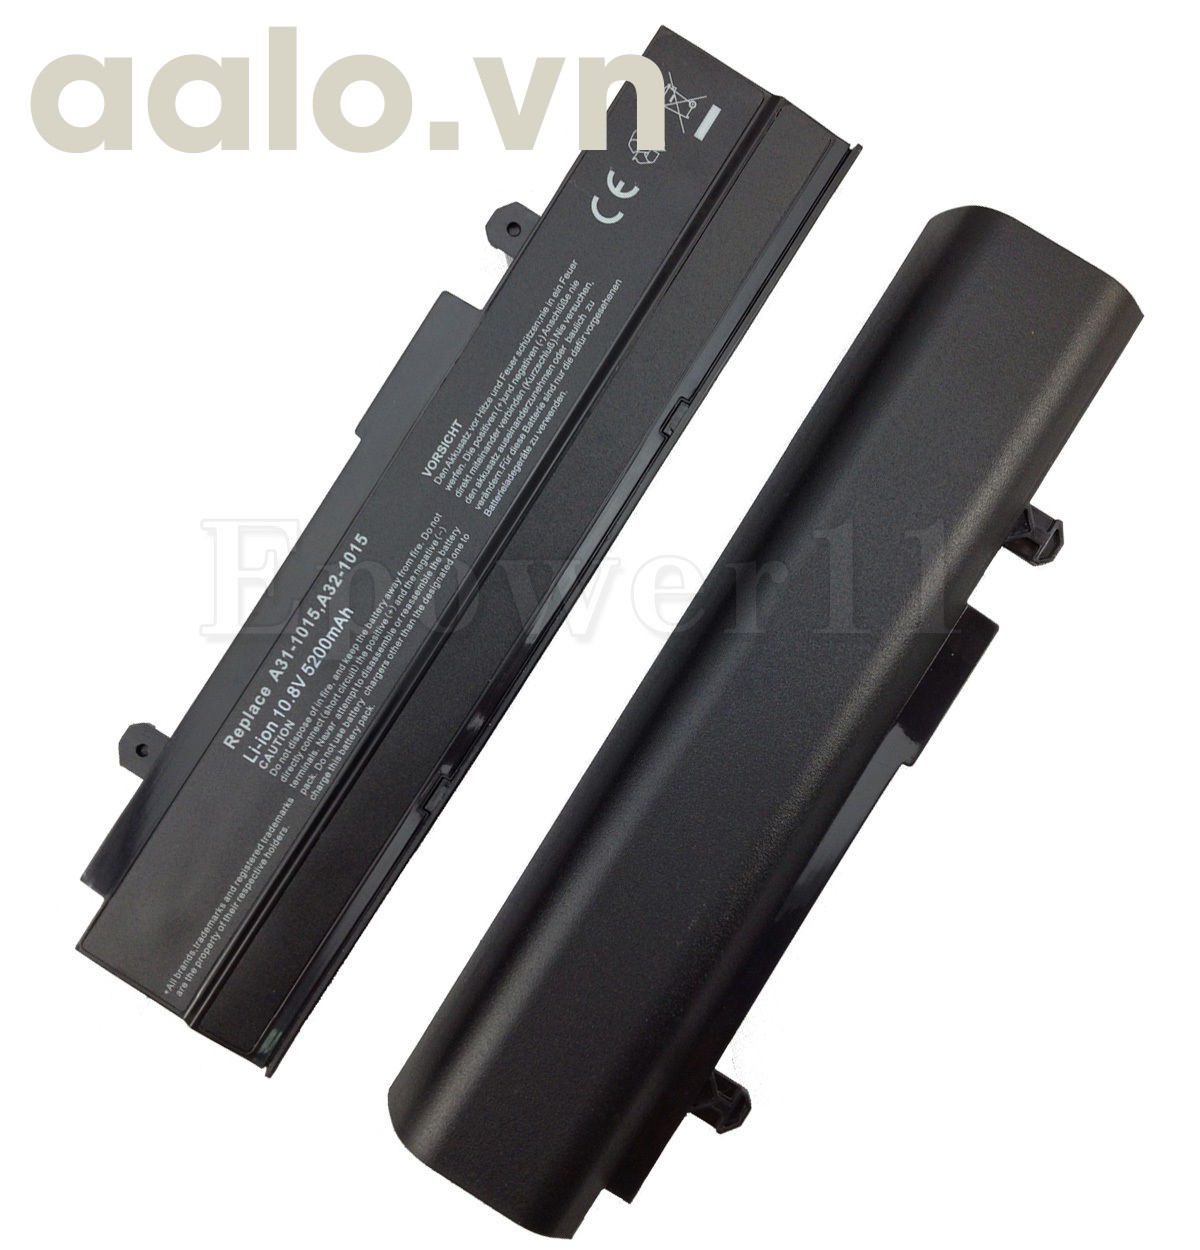 Pin Laptop Asus A32-1015 PL32-1015 For Asus Eee PC 1016 1016 - Battery Asus